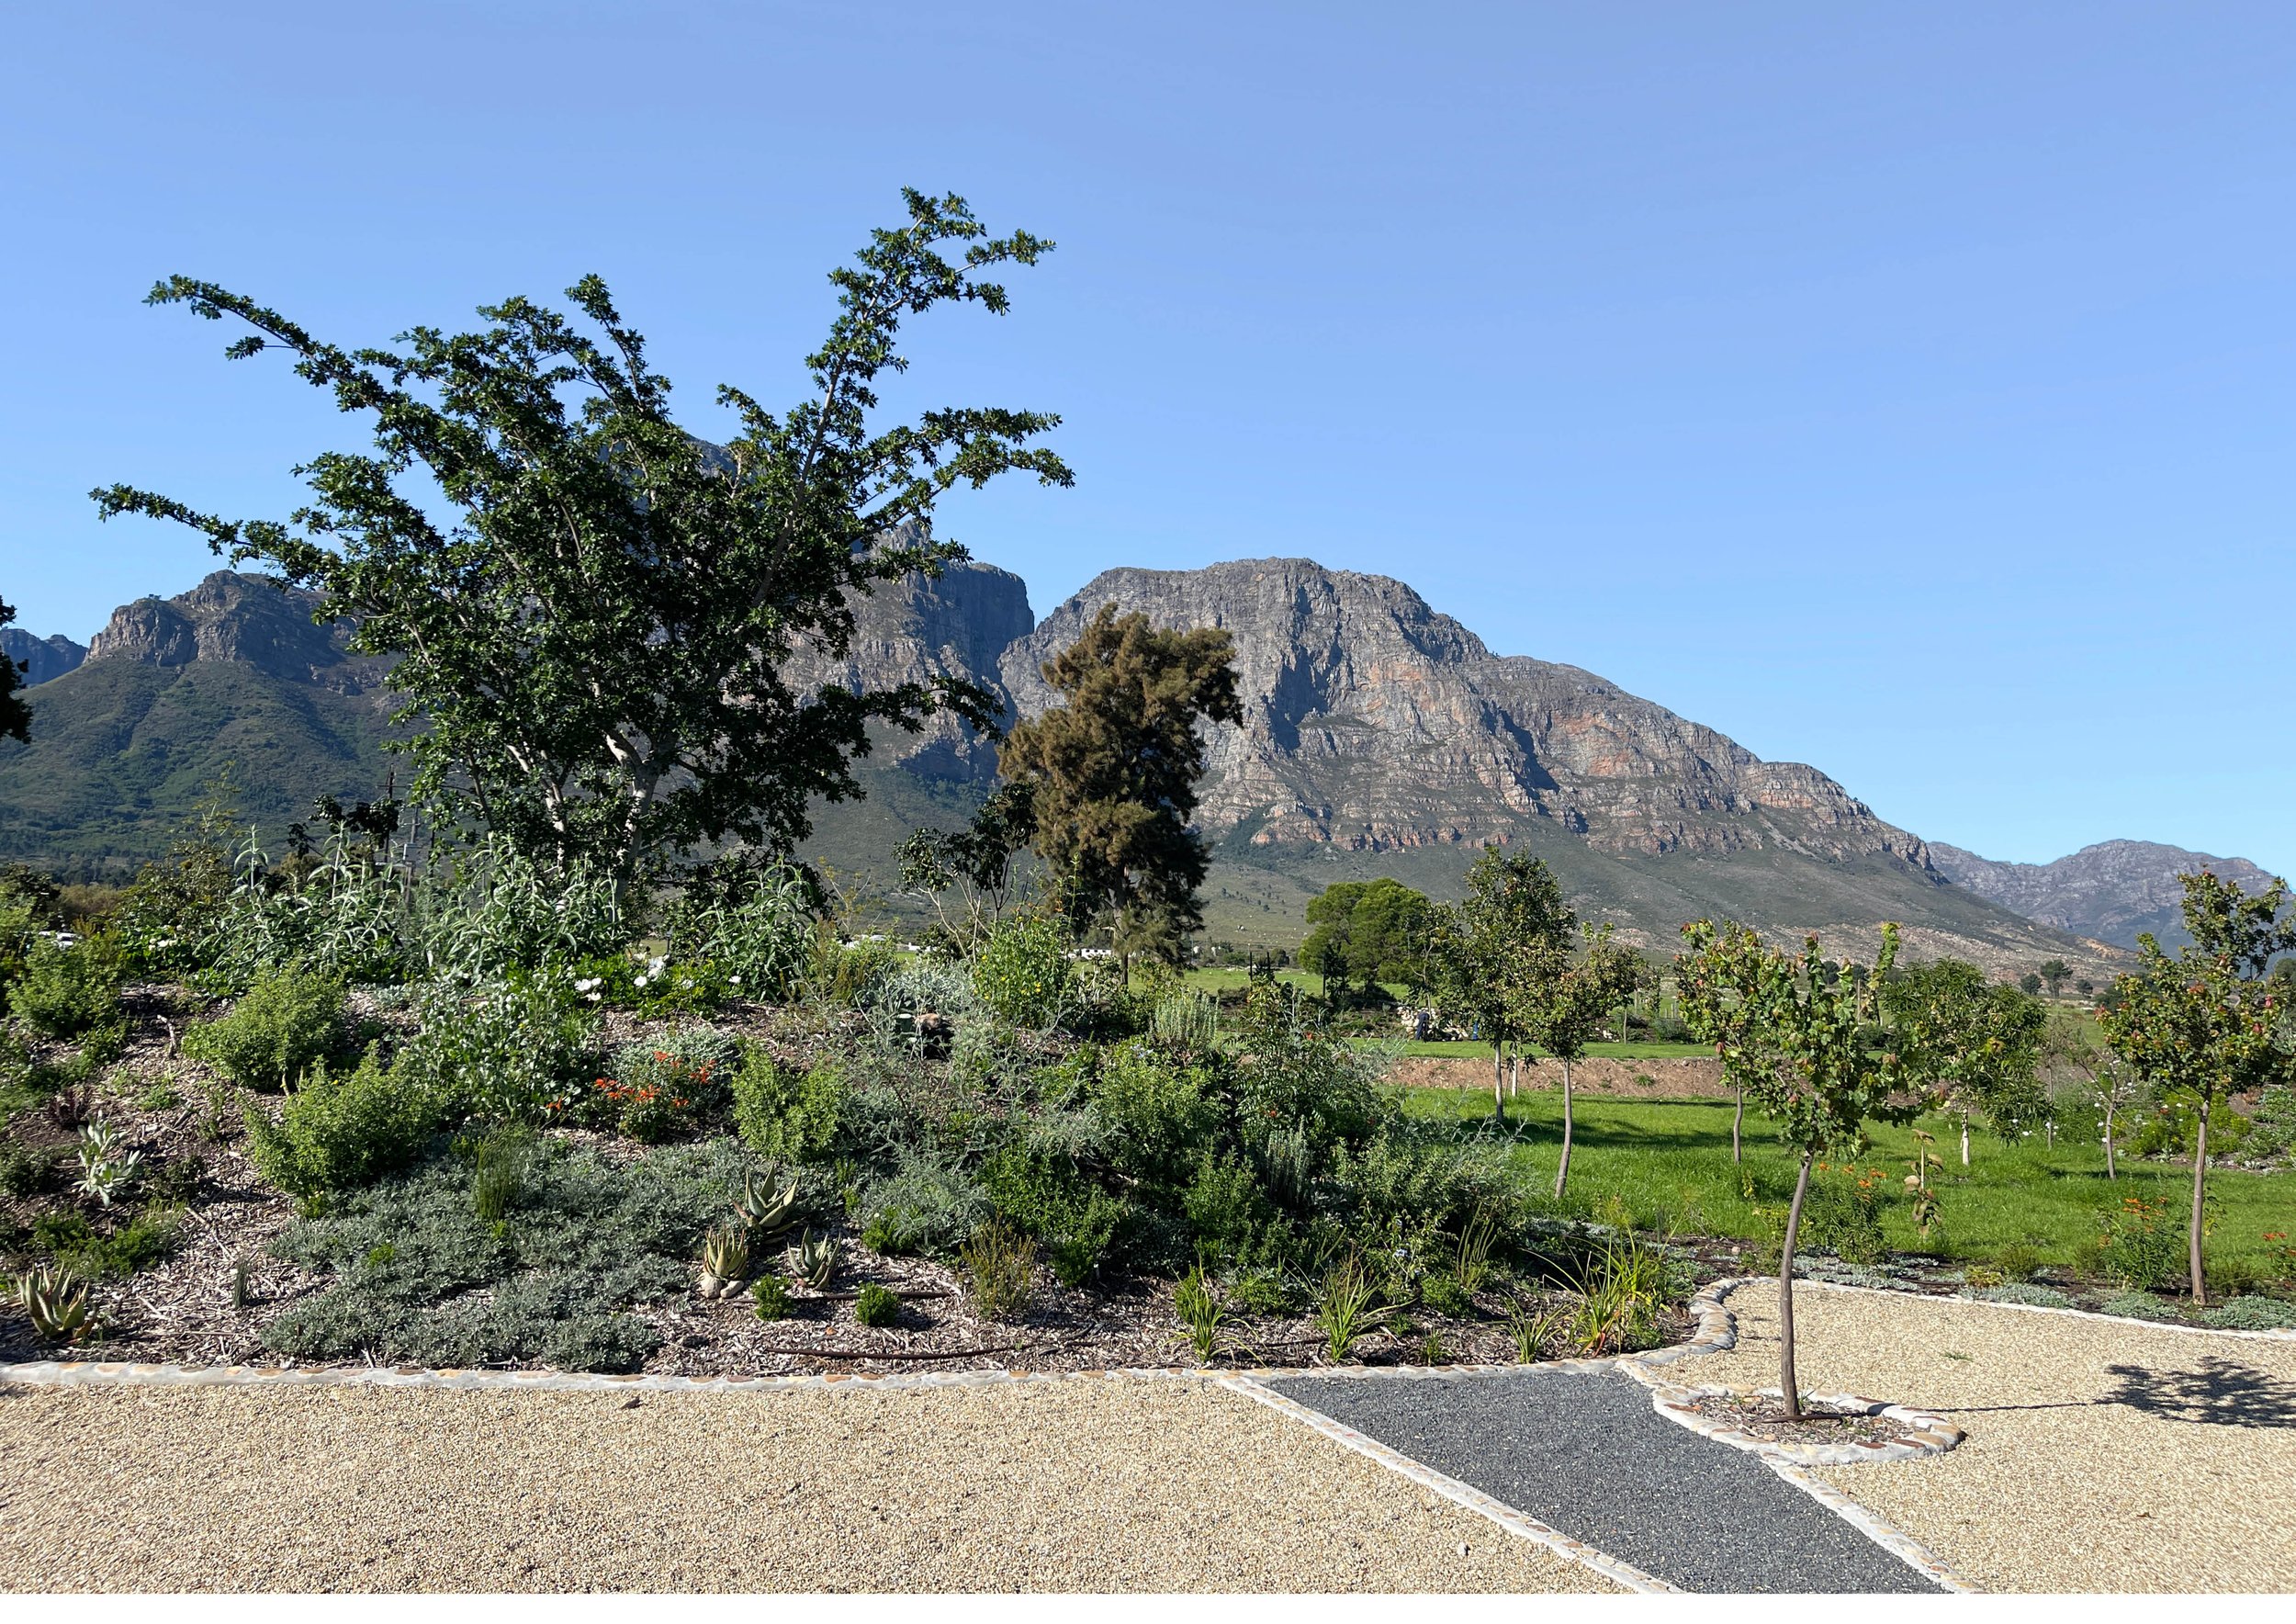  From The Bertha Retreat Website: The Bertha Retreat, based at Boschendal Wine Farm in the Dwarsrivier Valley, South Africa, was created as a space where activists, lawyers, storytellers and community groups can work together to progress social and e